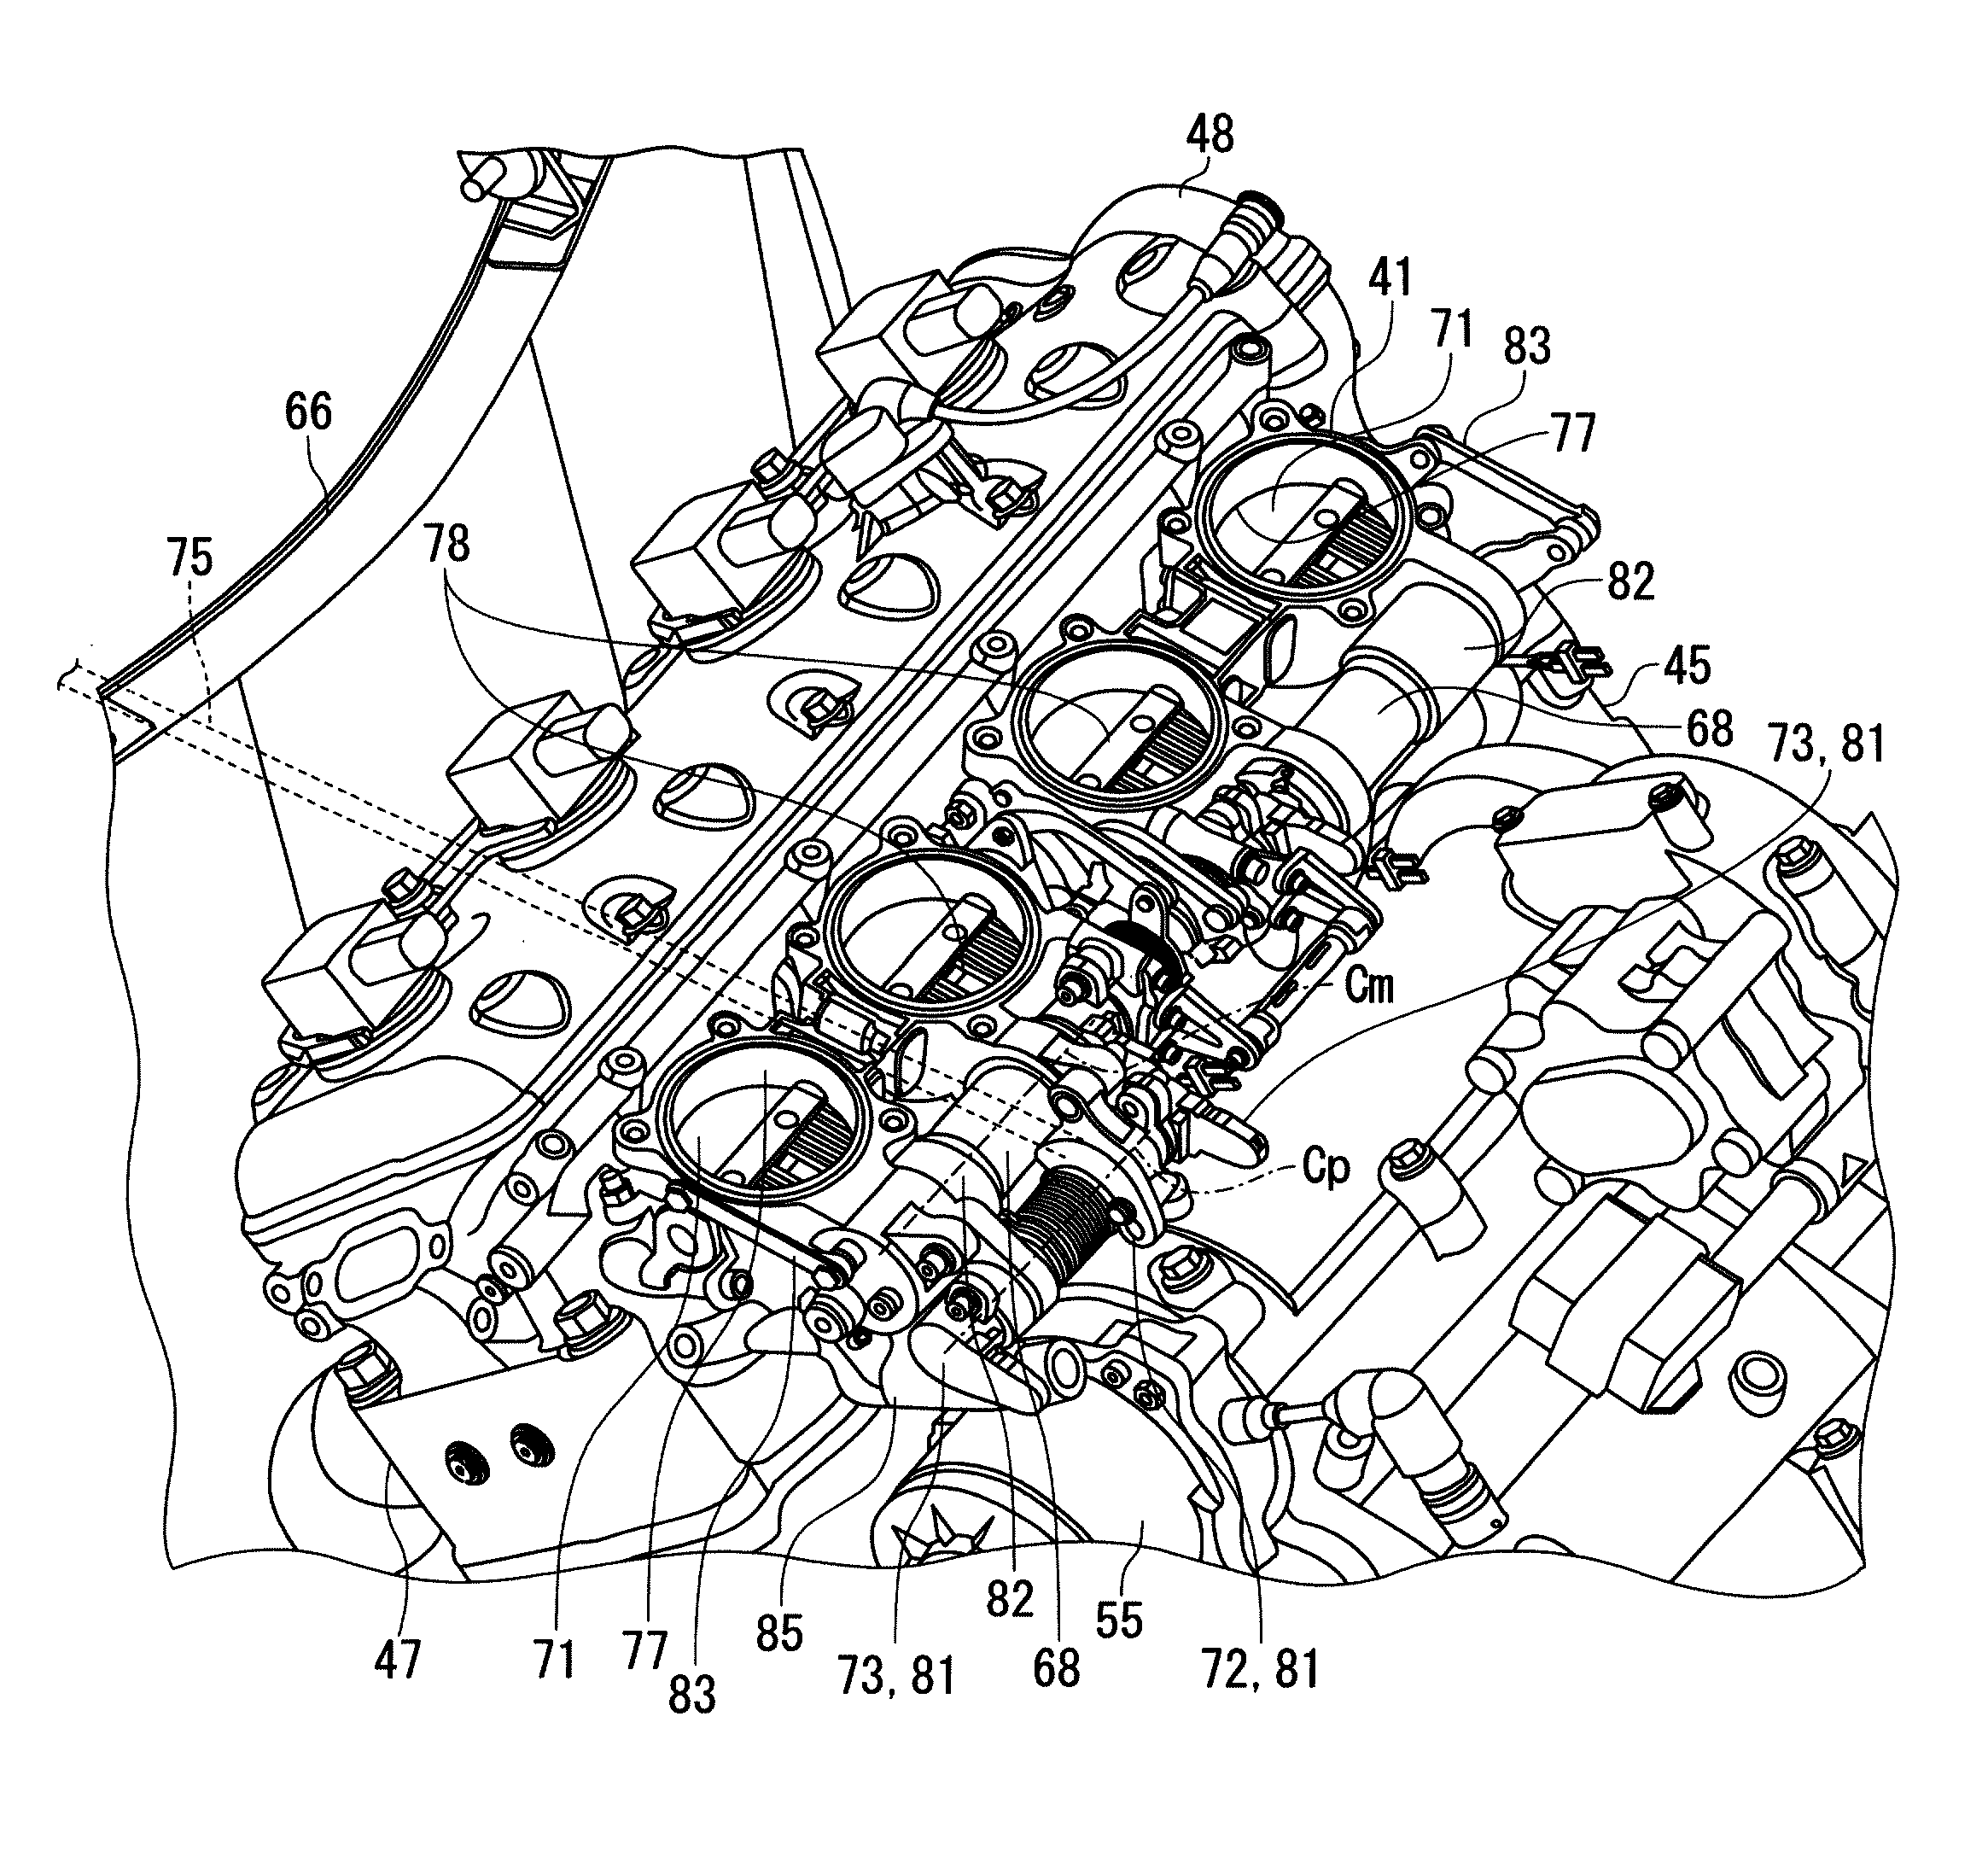 Intake structure of motorcycle